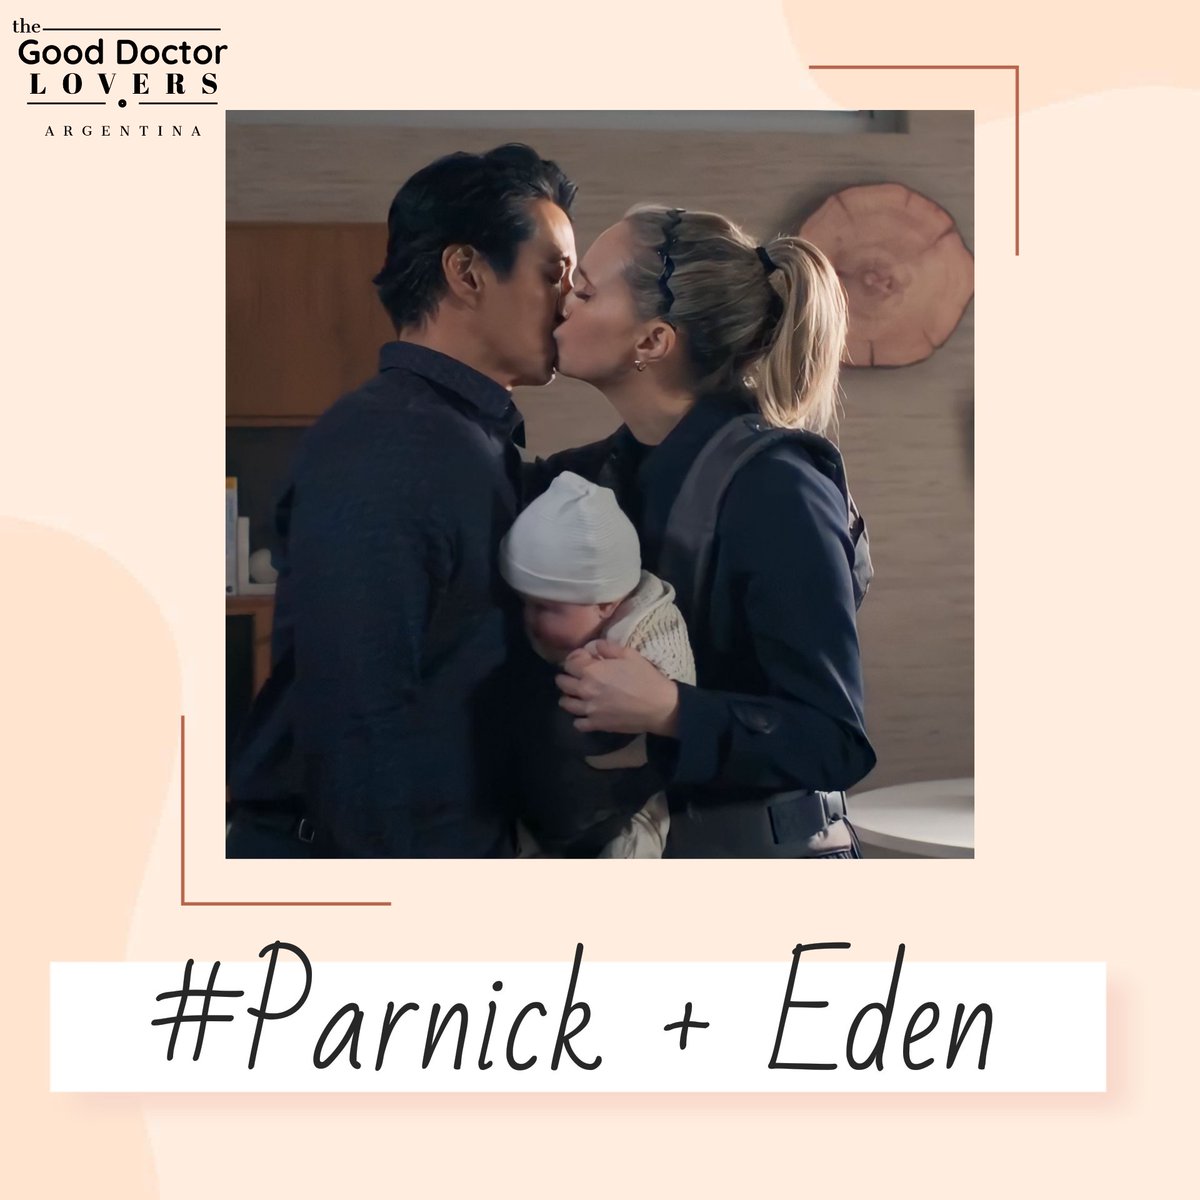 Let's start the week with lots of love and an appreciation post for these two lovebirds + the sweet and little #Eden

Yes. #DrAlexPark and #DrMorganReznick are becoming a family. 

#Parnick + #Eden is the perfect medicine for a Monday.

@WillYunLee
@FionaGubelmann
#TheGoodDoctor